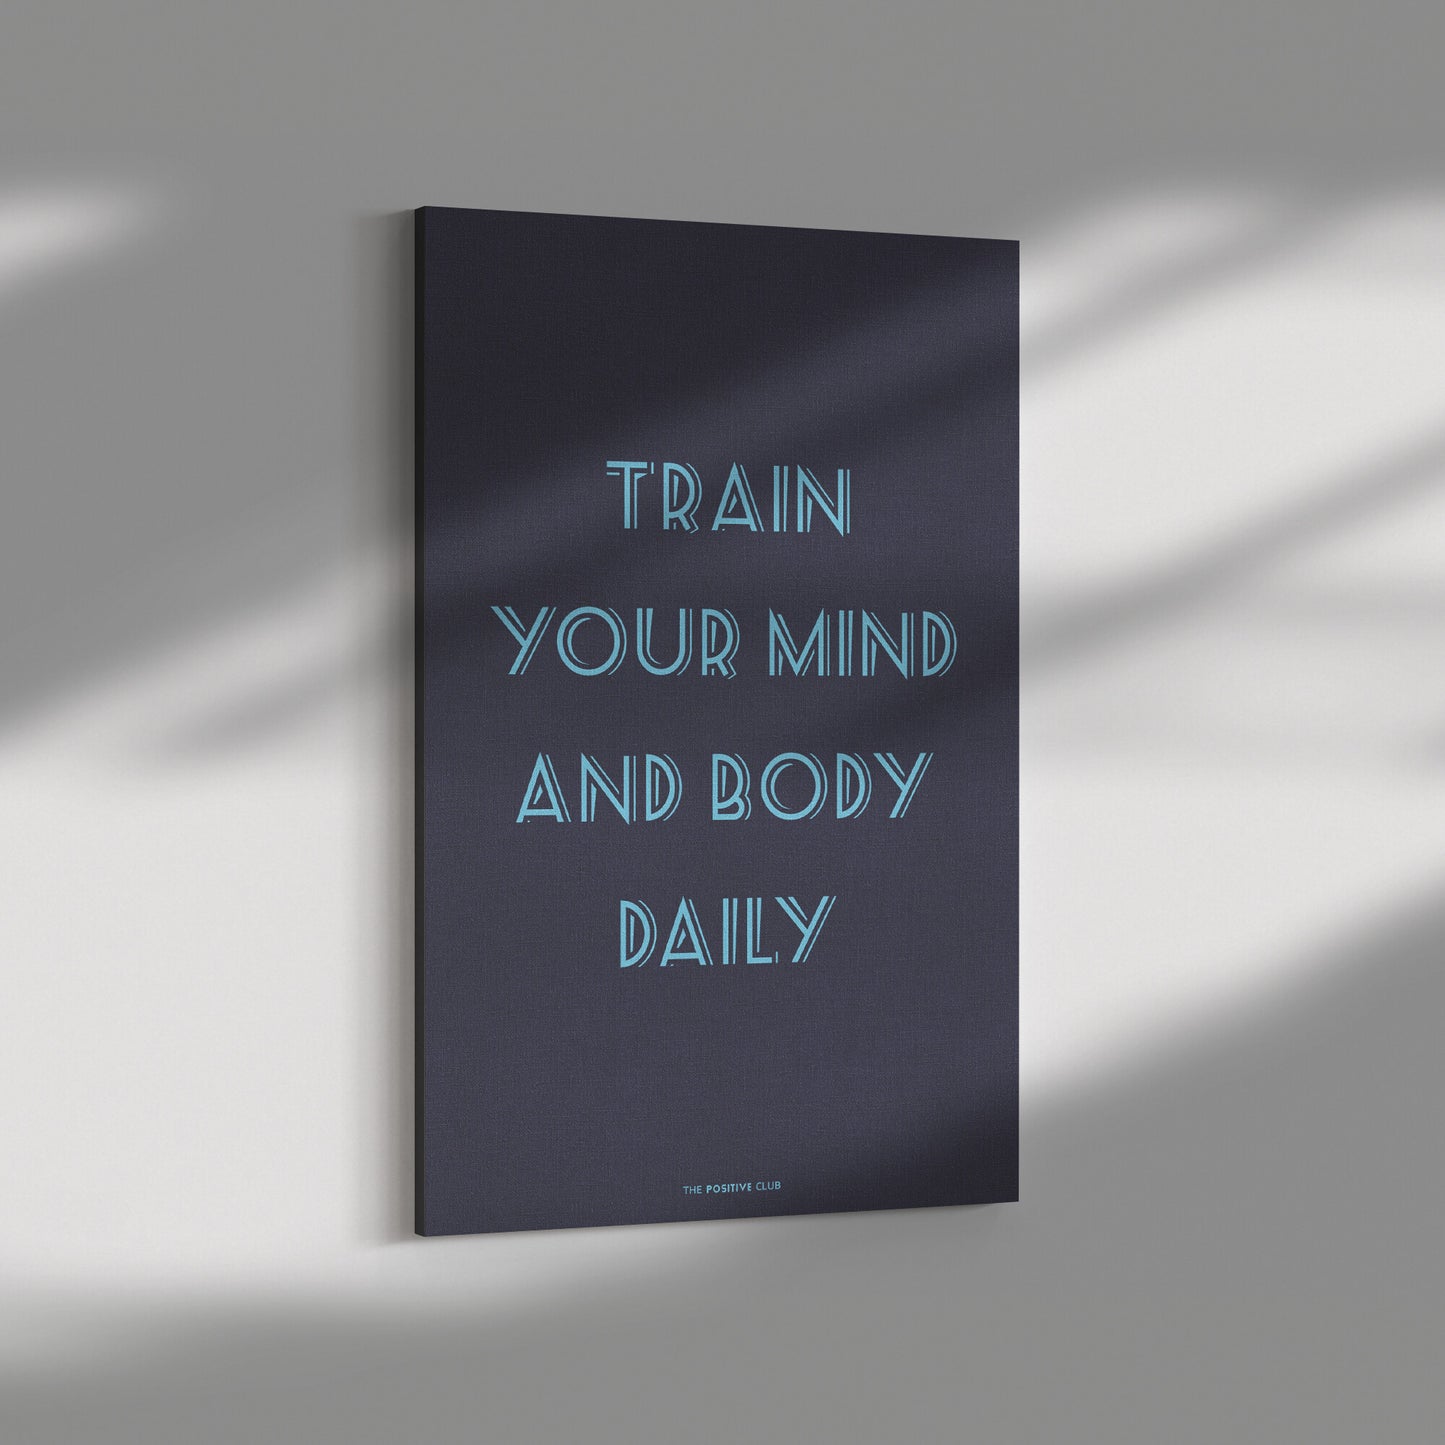 TRAIN YOUR MIND AND BODY DAILY